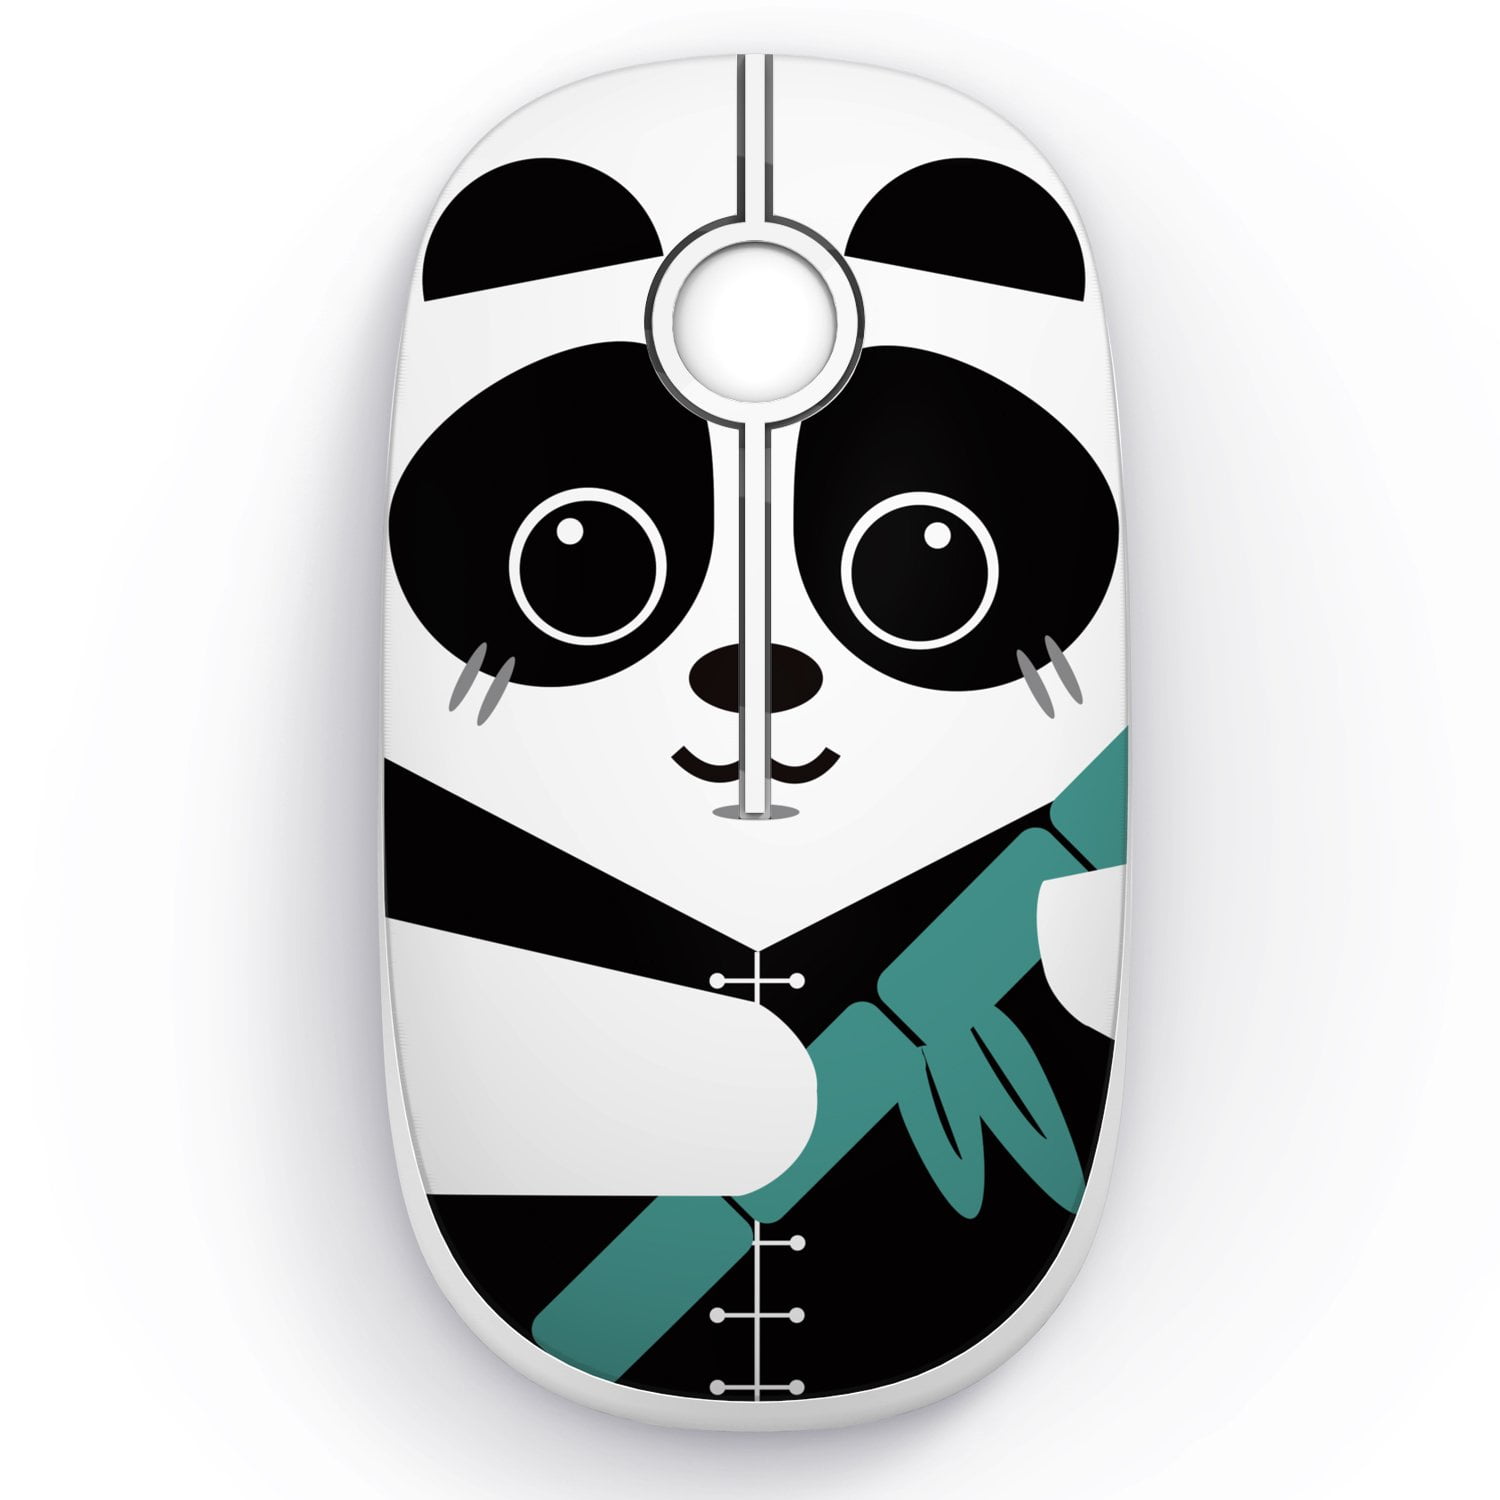 2.4G Wireless Mouse with Cute Pattern Design for All Laptops and Desktops with Nano Receiver Design Fabric Textile 